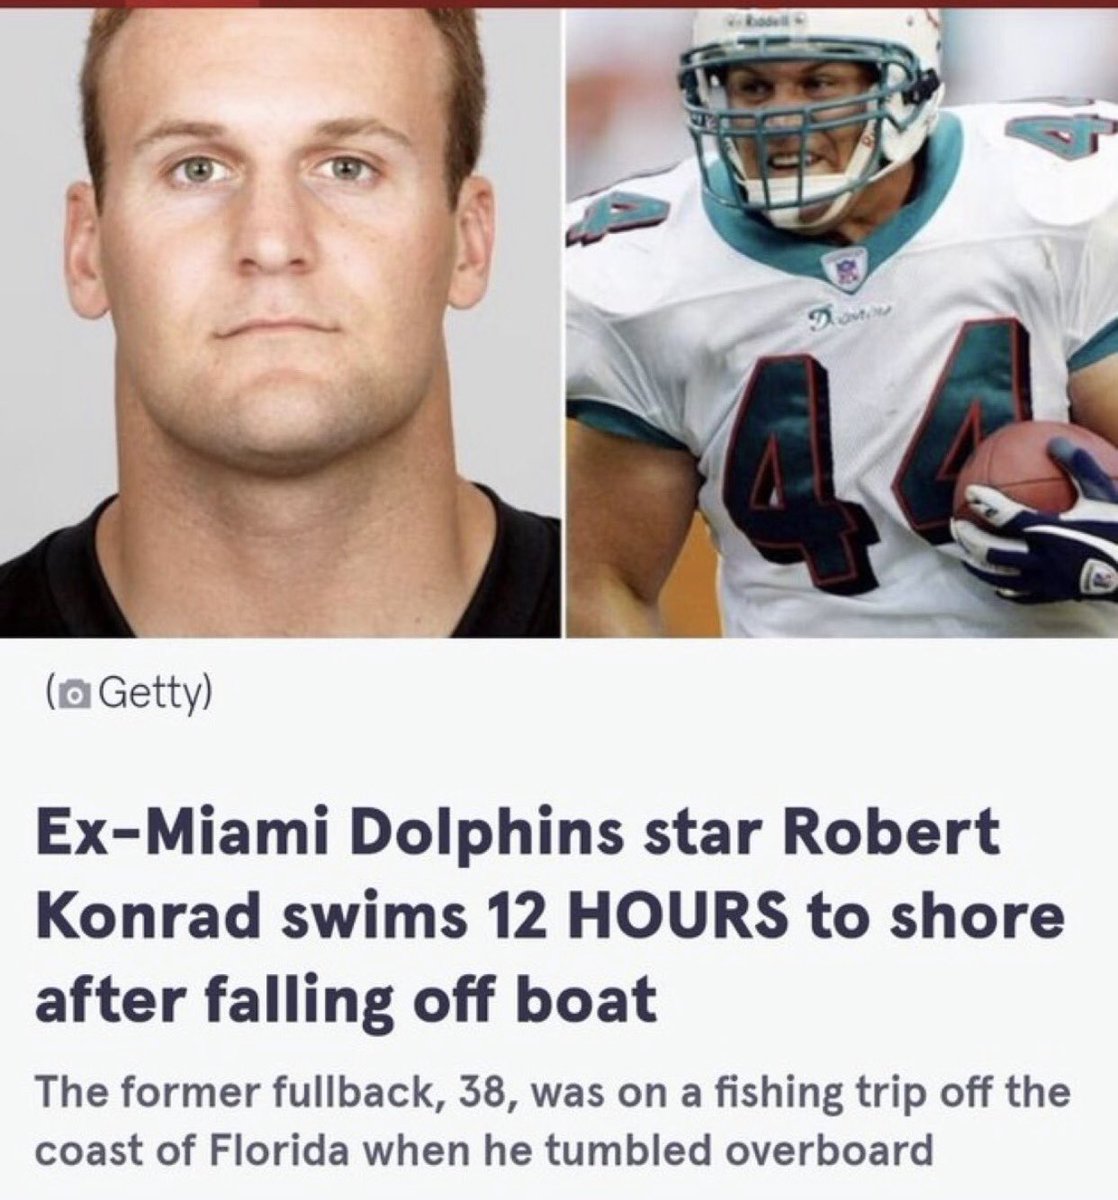 dudes posting wins - rob konrad - Getty ExMiami Dolphins star Robert Konrad swims 12 Hours to shore after falling off boat The former fullback, 38, was on a fishing trip off the coast of Florida when he tumbled overboard